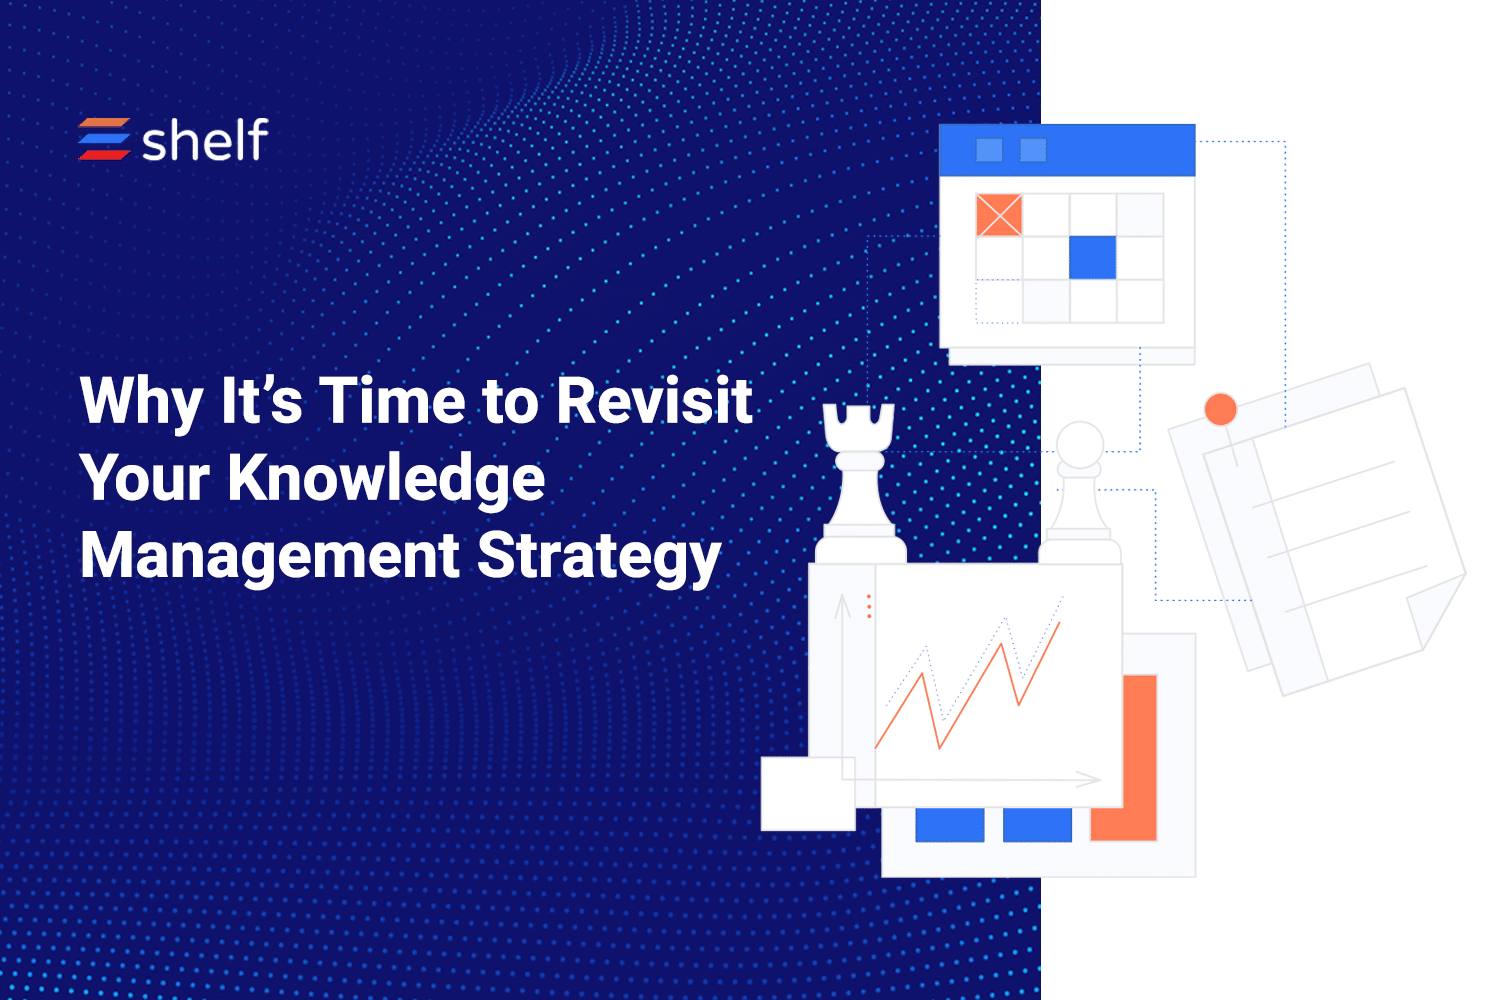 Why It’s Time to Revisit Your Knowledge Management Strategy: image 1